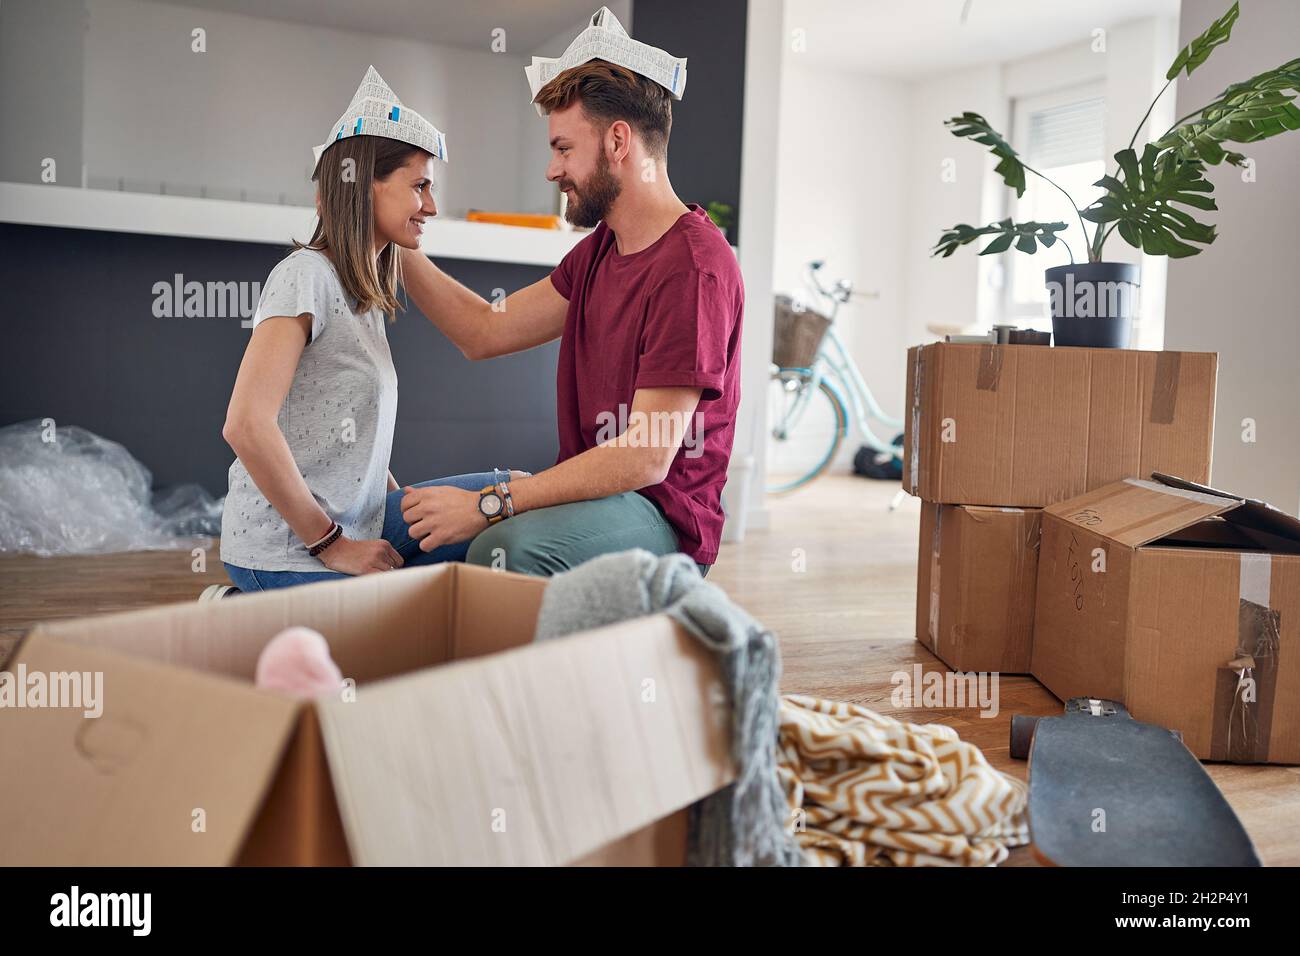 young married couple in love is about to kiss in their brand new apartment. just moved in. Stock Photo